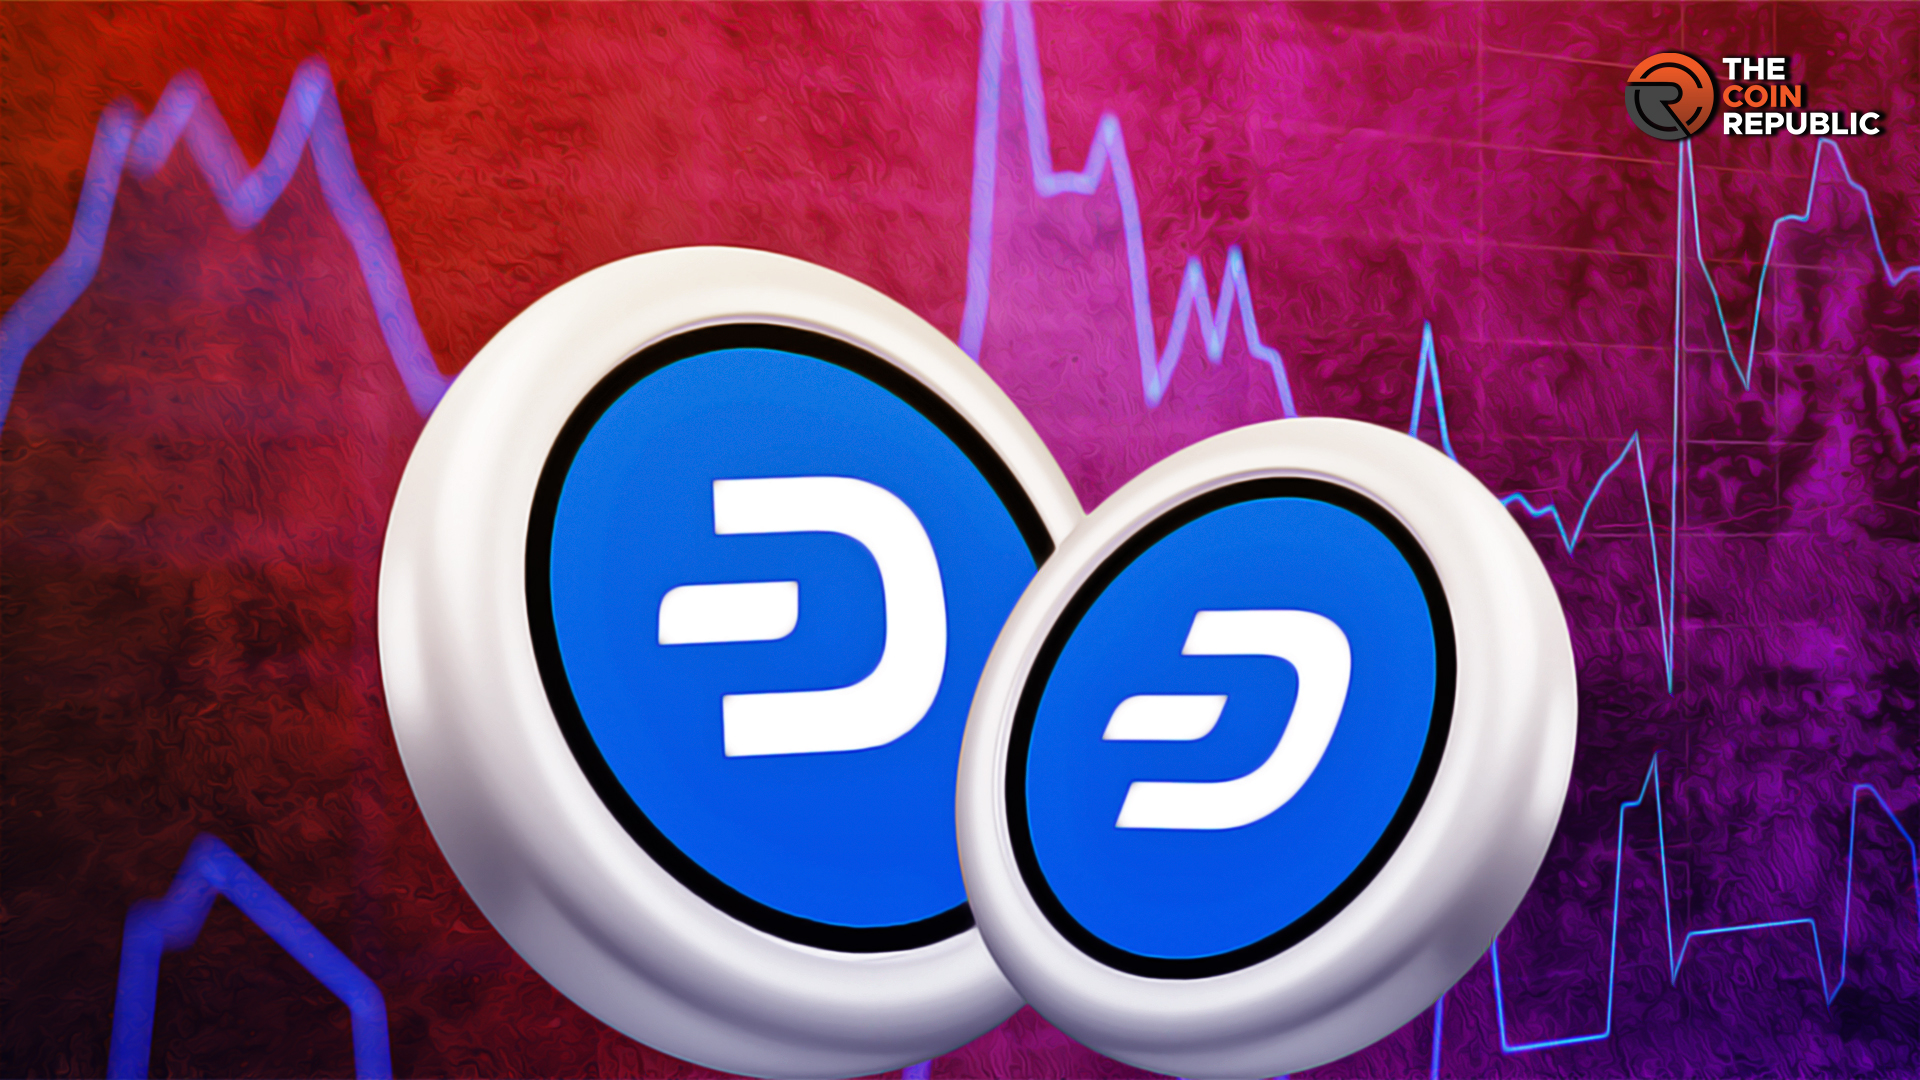 More Decline Or Best Discount, What To Do With Dash Crypto?